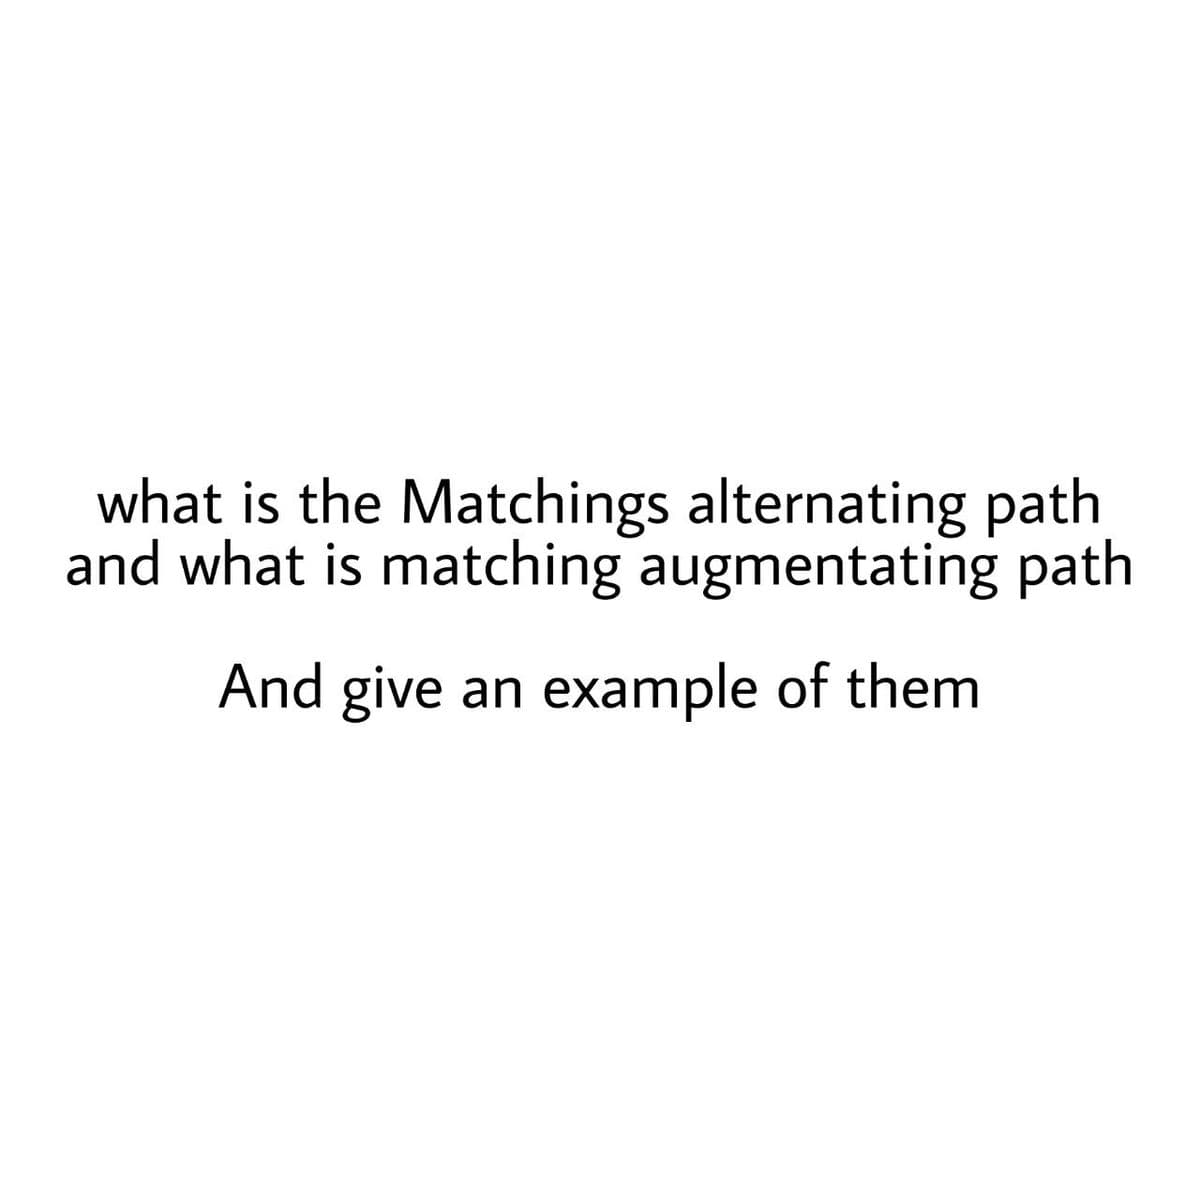 what is the Matchings alternating path
and what is matching augmentating path
And give
an
example of them
